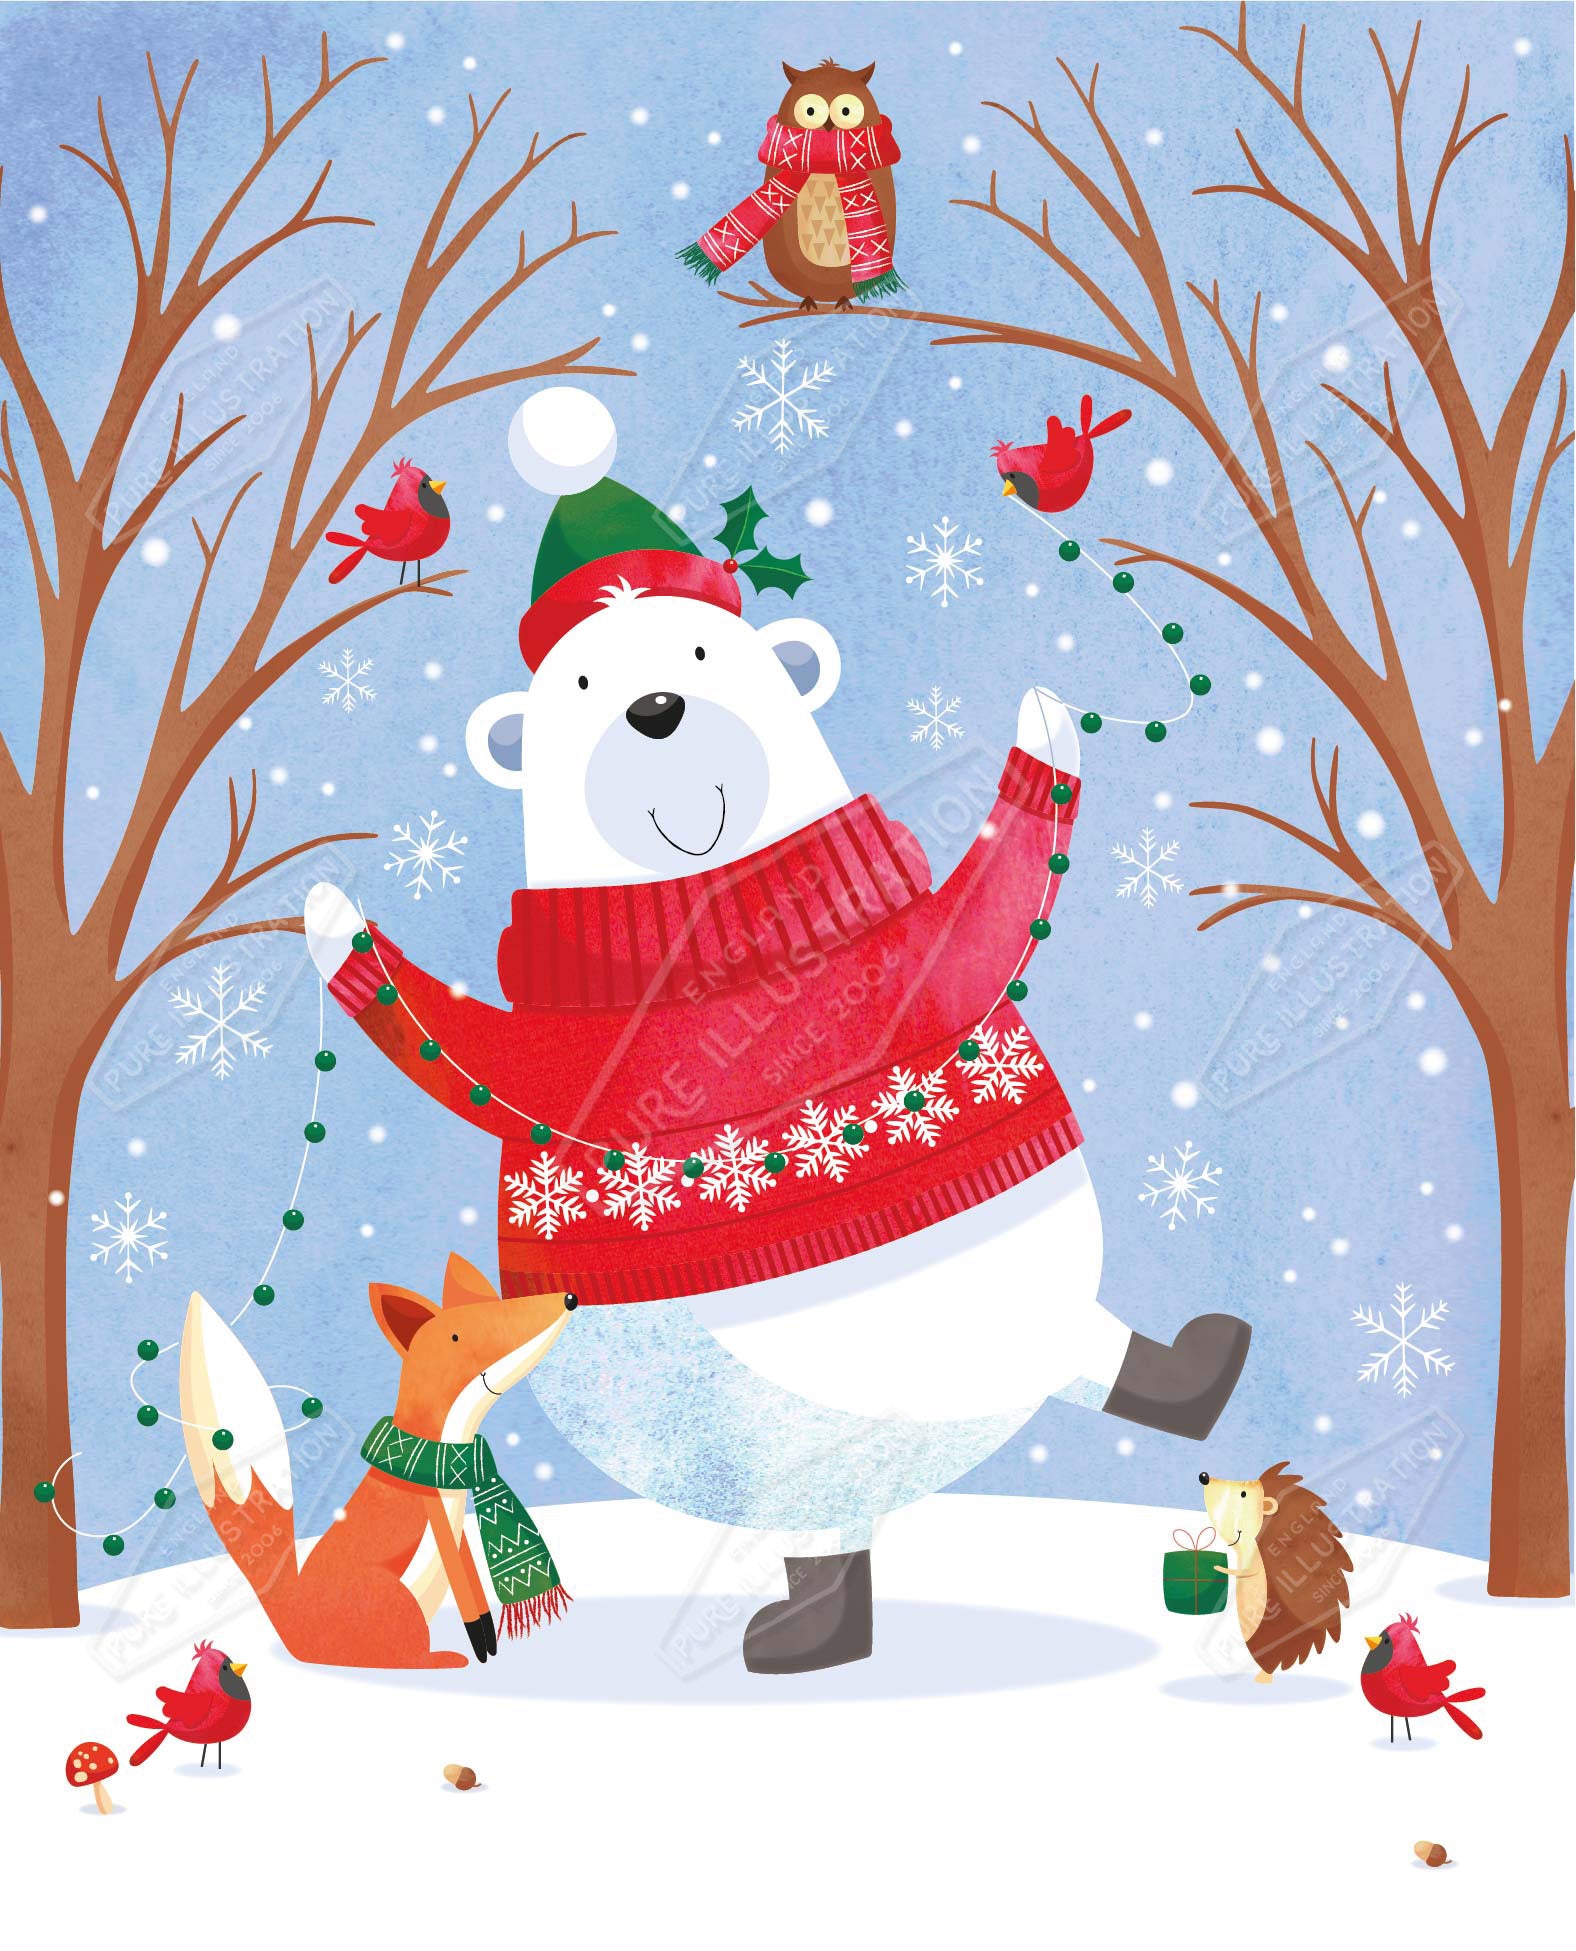 00035109SPI- Sarah Pitt is represented by Pure Art Licensing Agency - Christmas Greeting Card Design